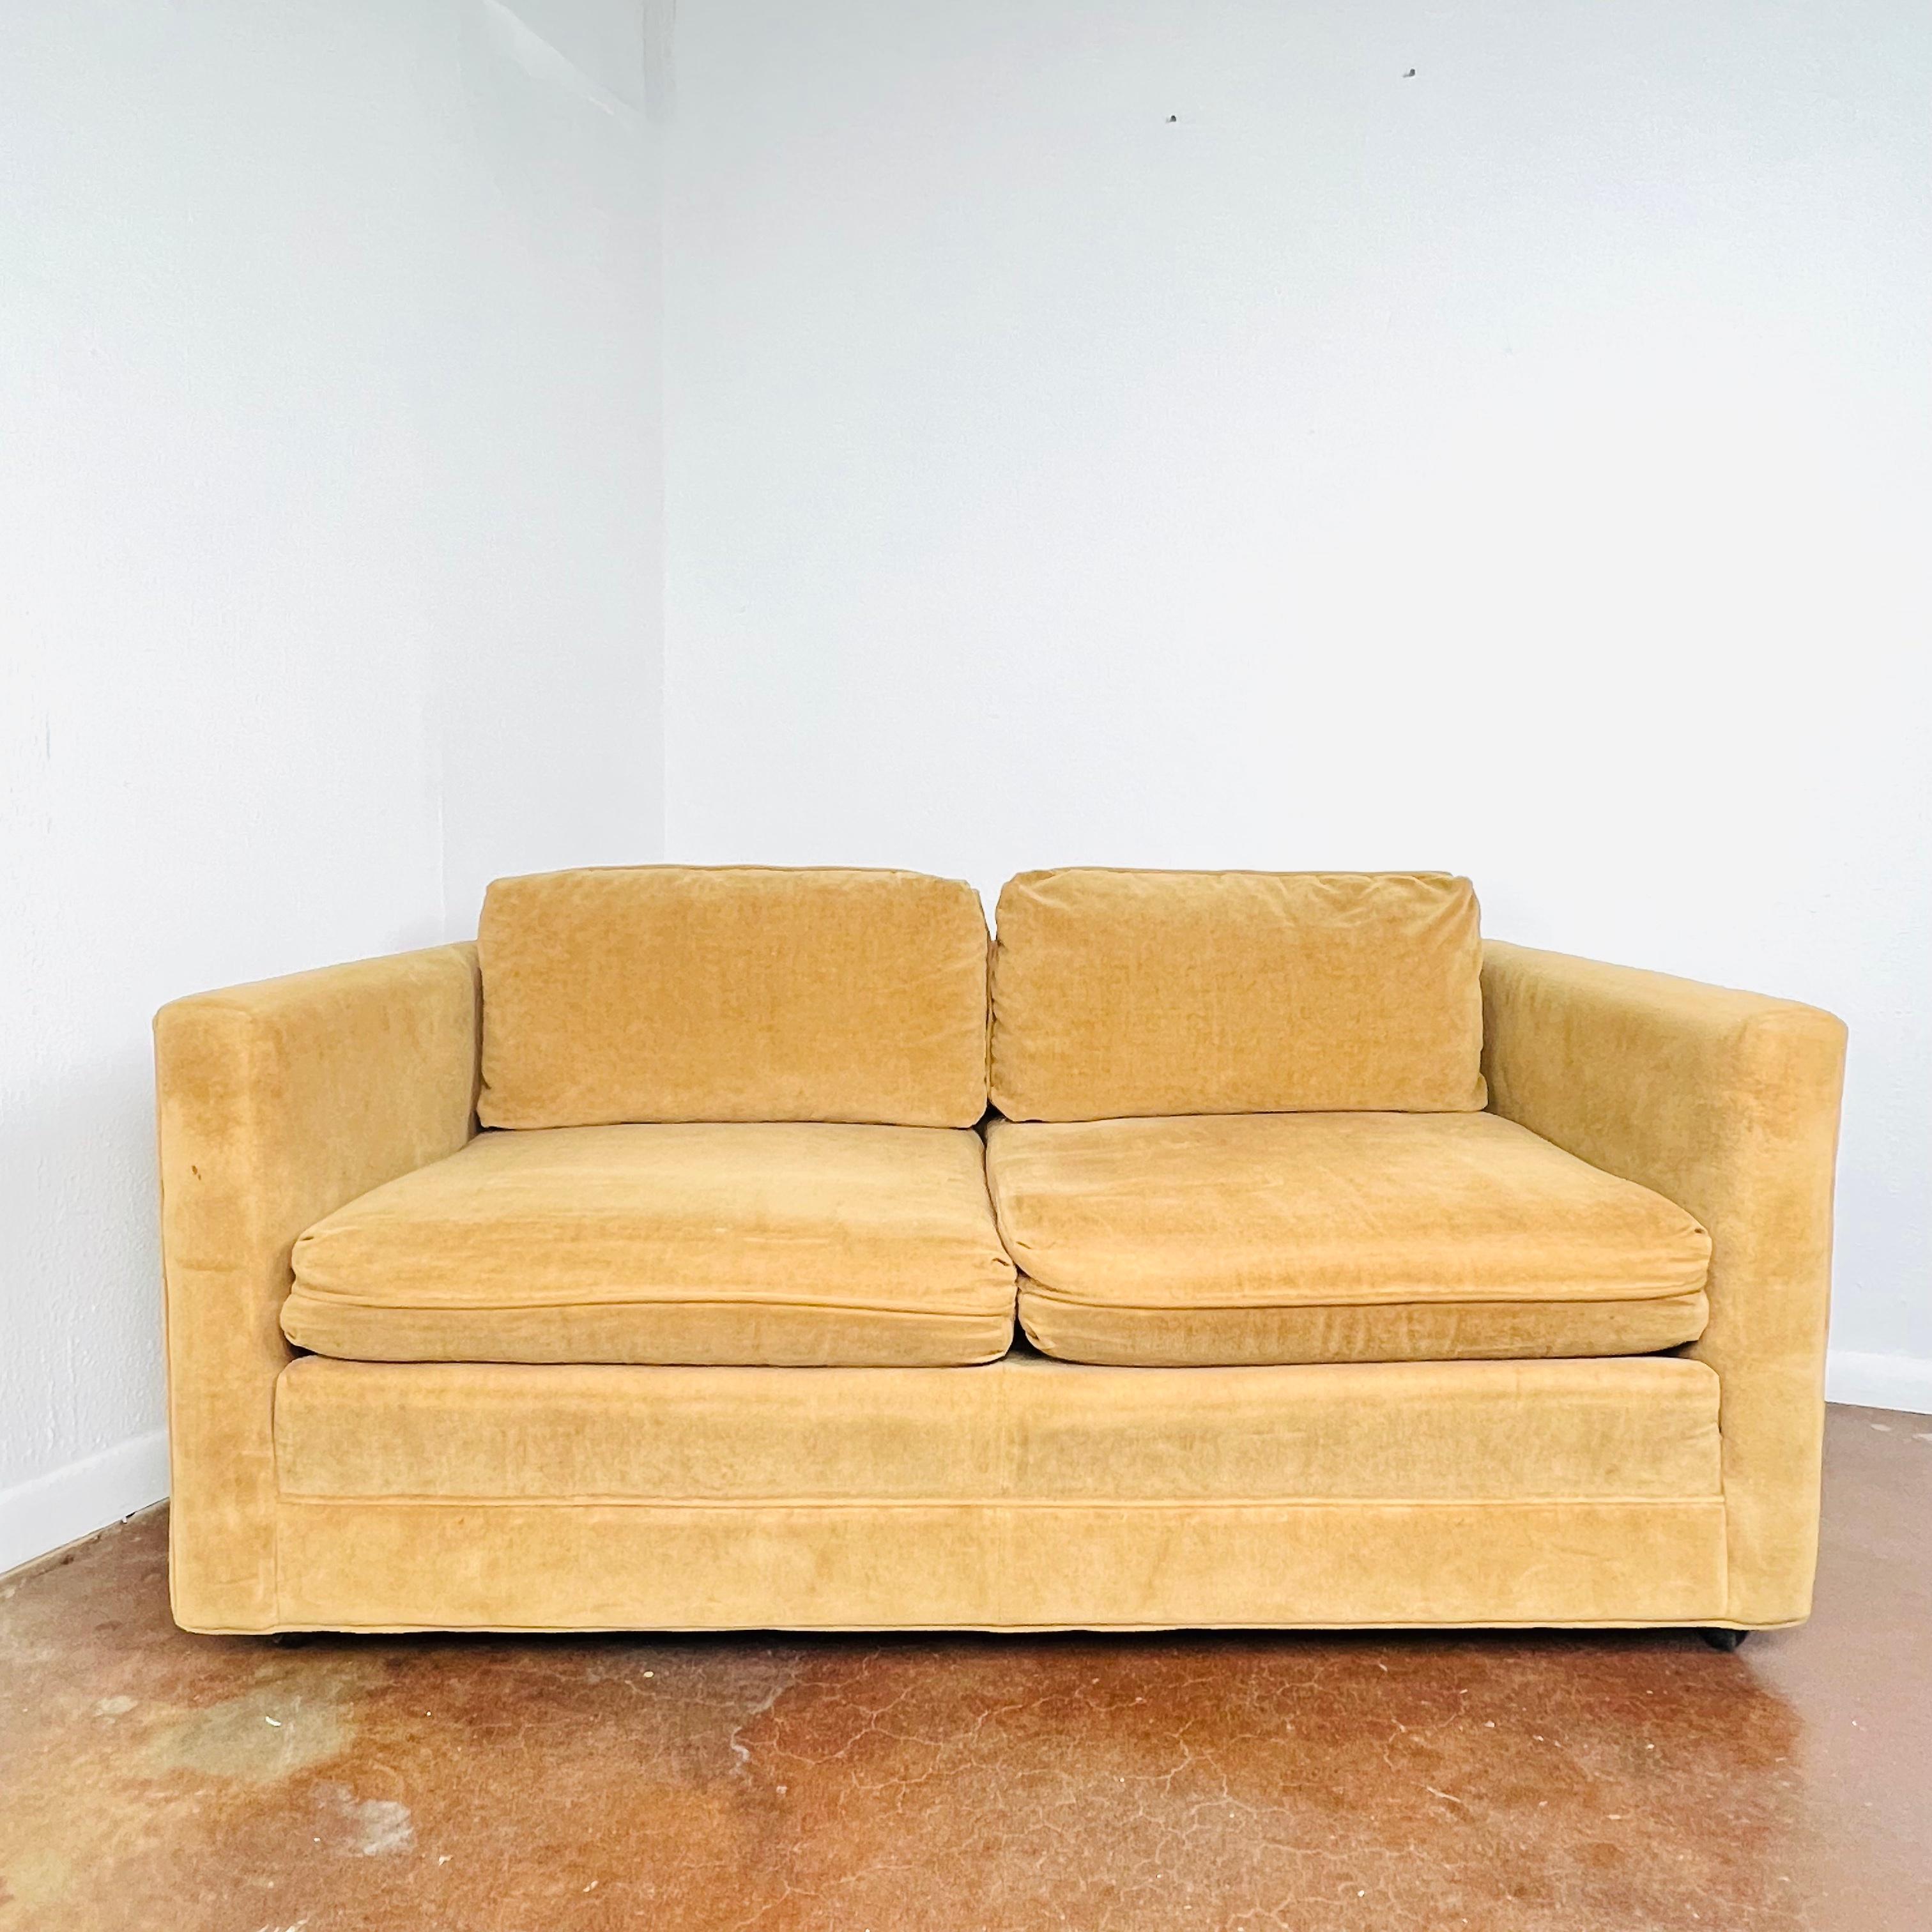 A Minimalist 1960s design, this Milo Baughman style tuxedo loveseat features a sturdy, streamlined frame with straight back and arms. Front casters. Upholstery shows some wear and discoloration; reupholstery is recommended.